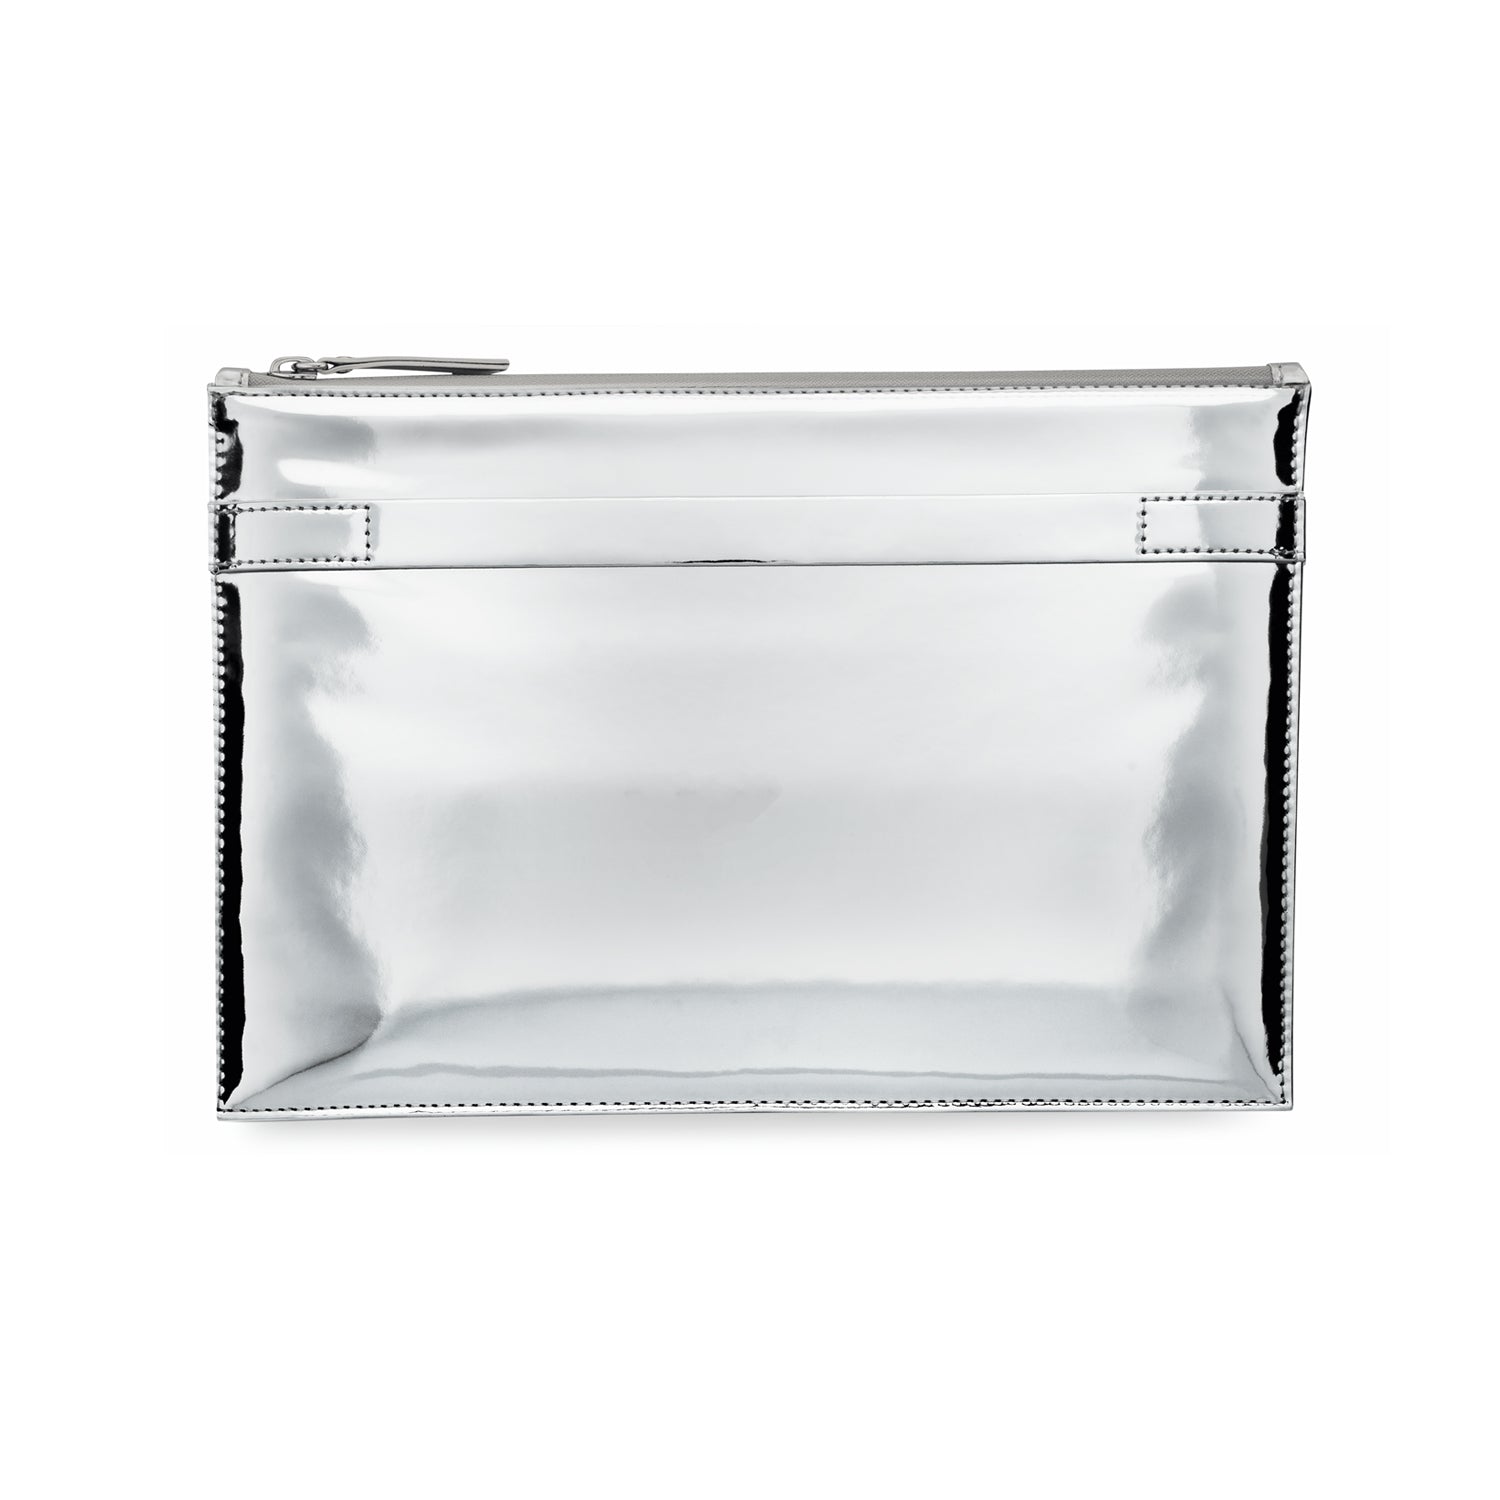 Front view of the Performance Tech Pouch. The rectangular silver pouch has a zipper along the top.